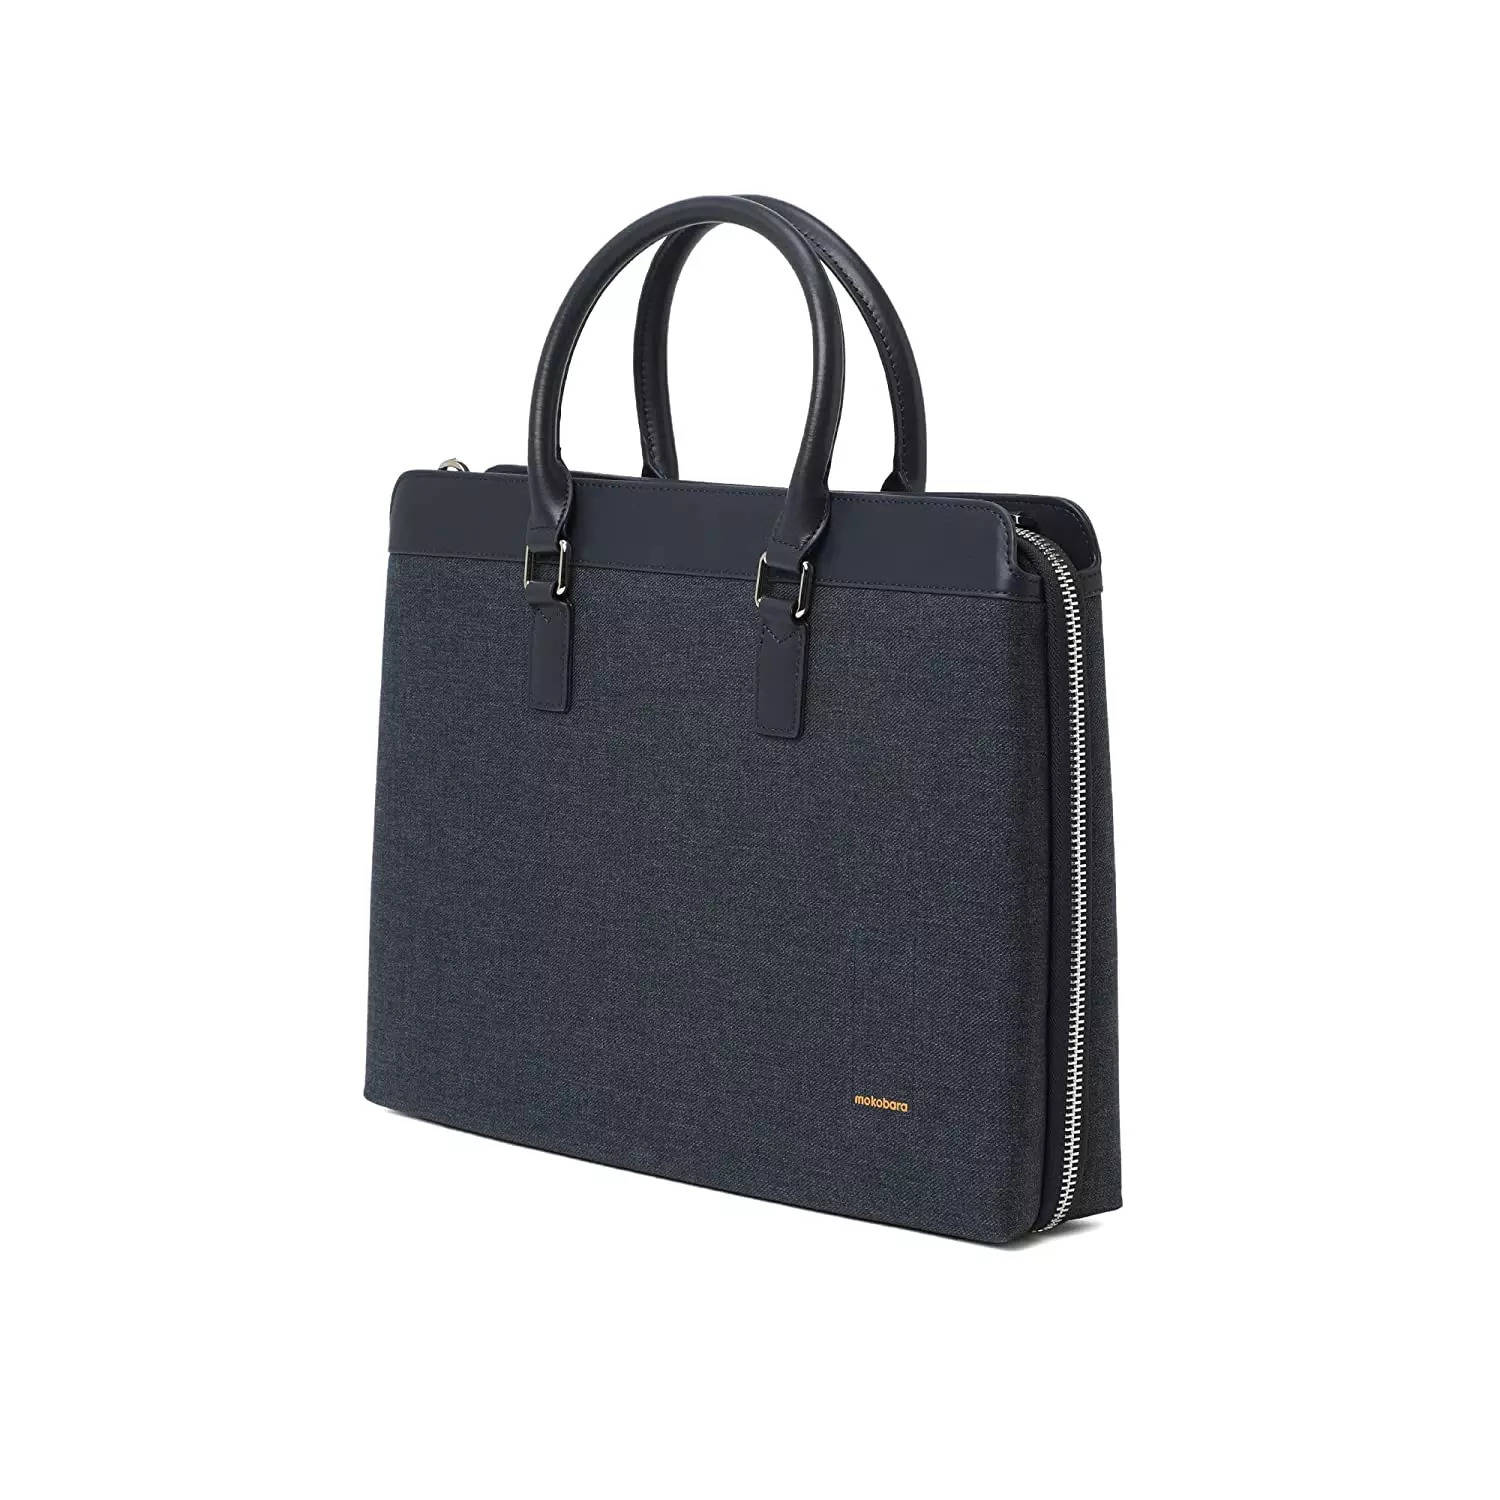 Top Bags Brands To Shop Online | LBB